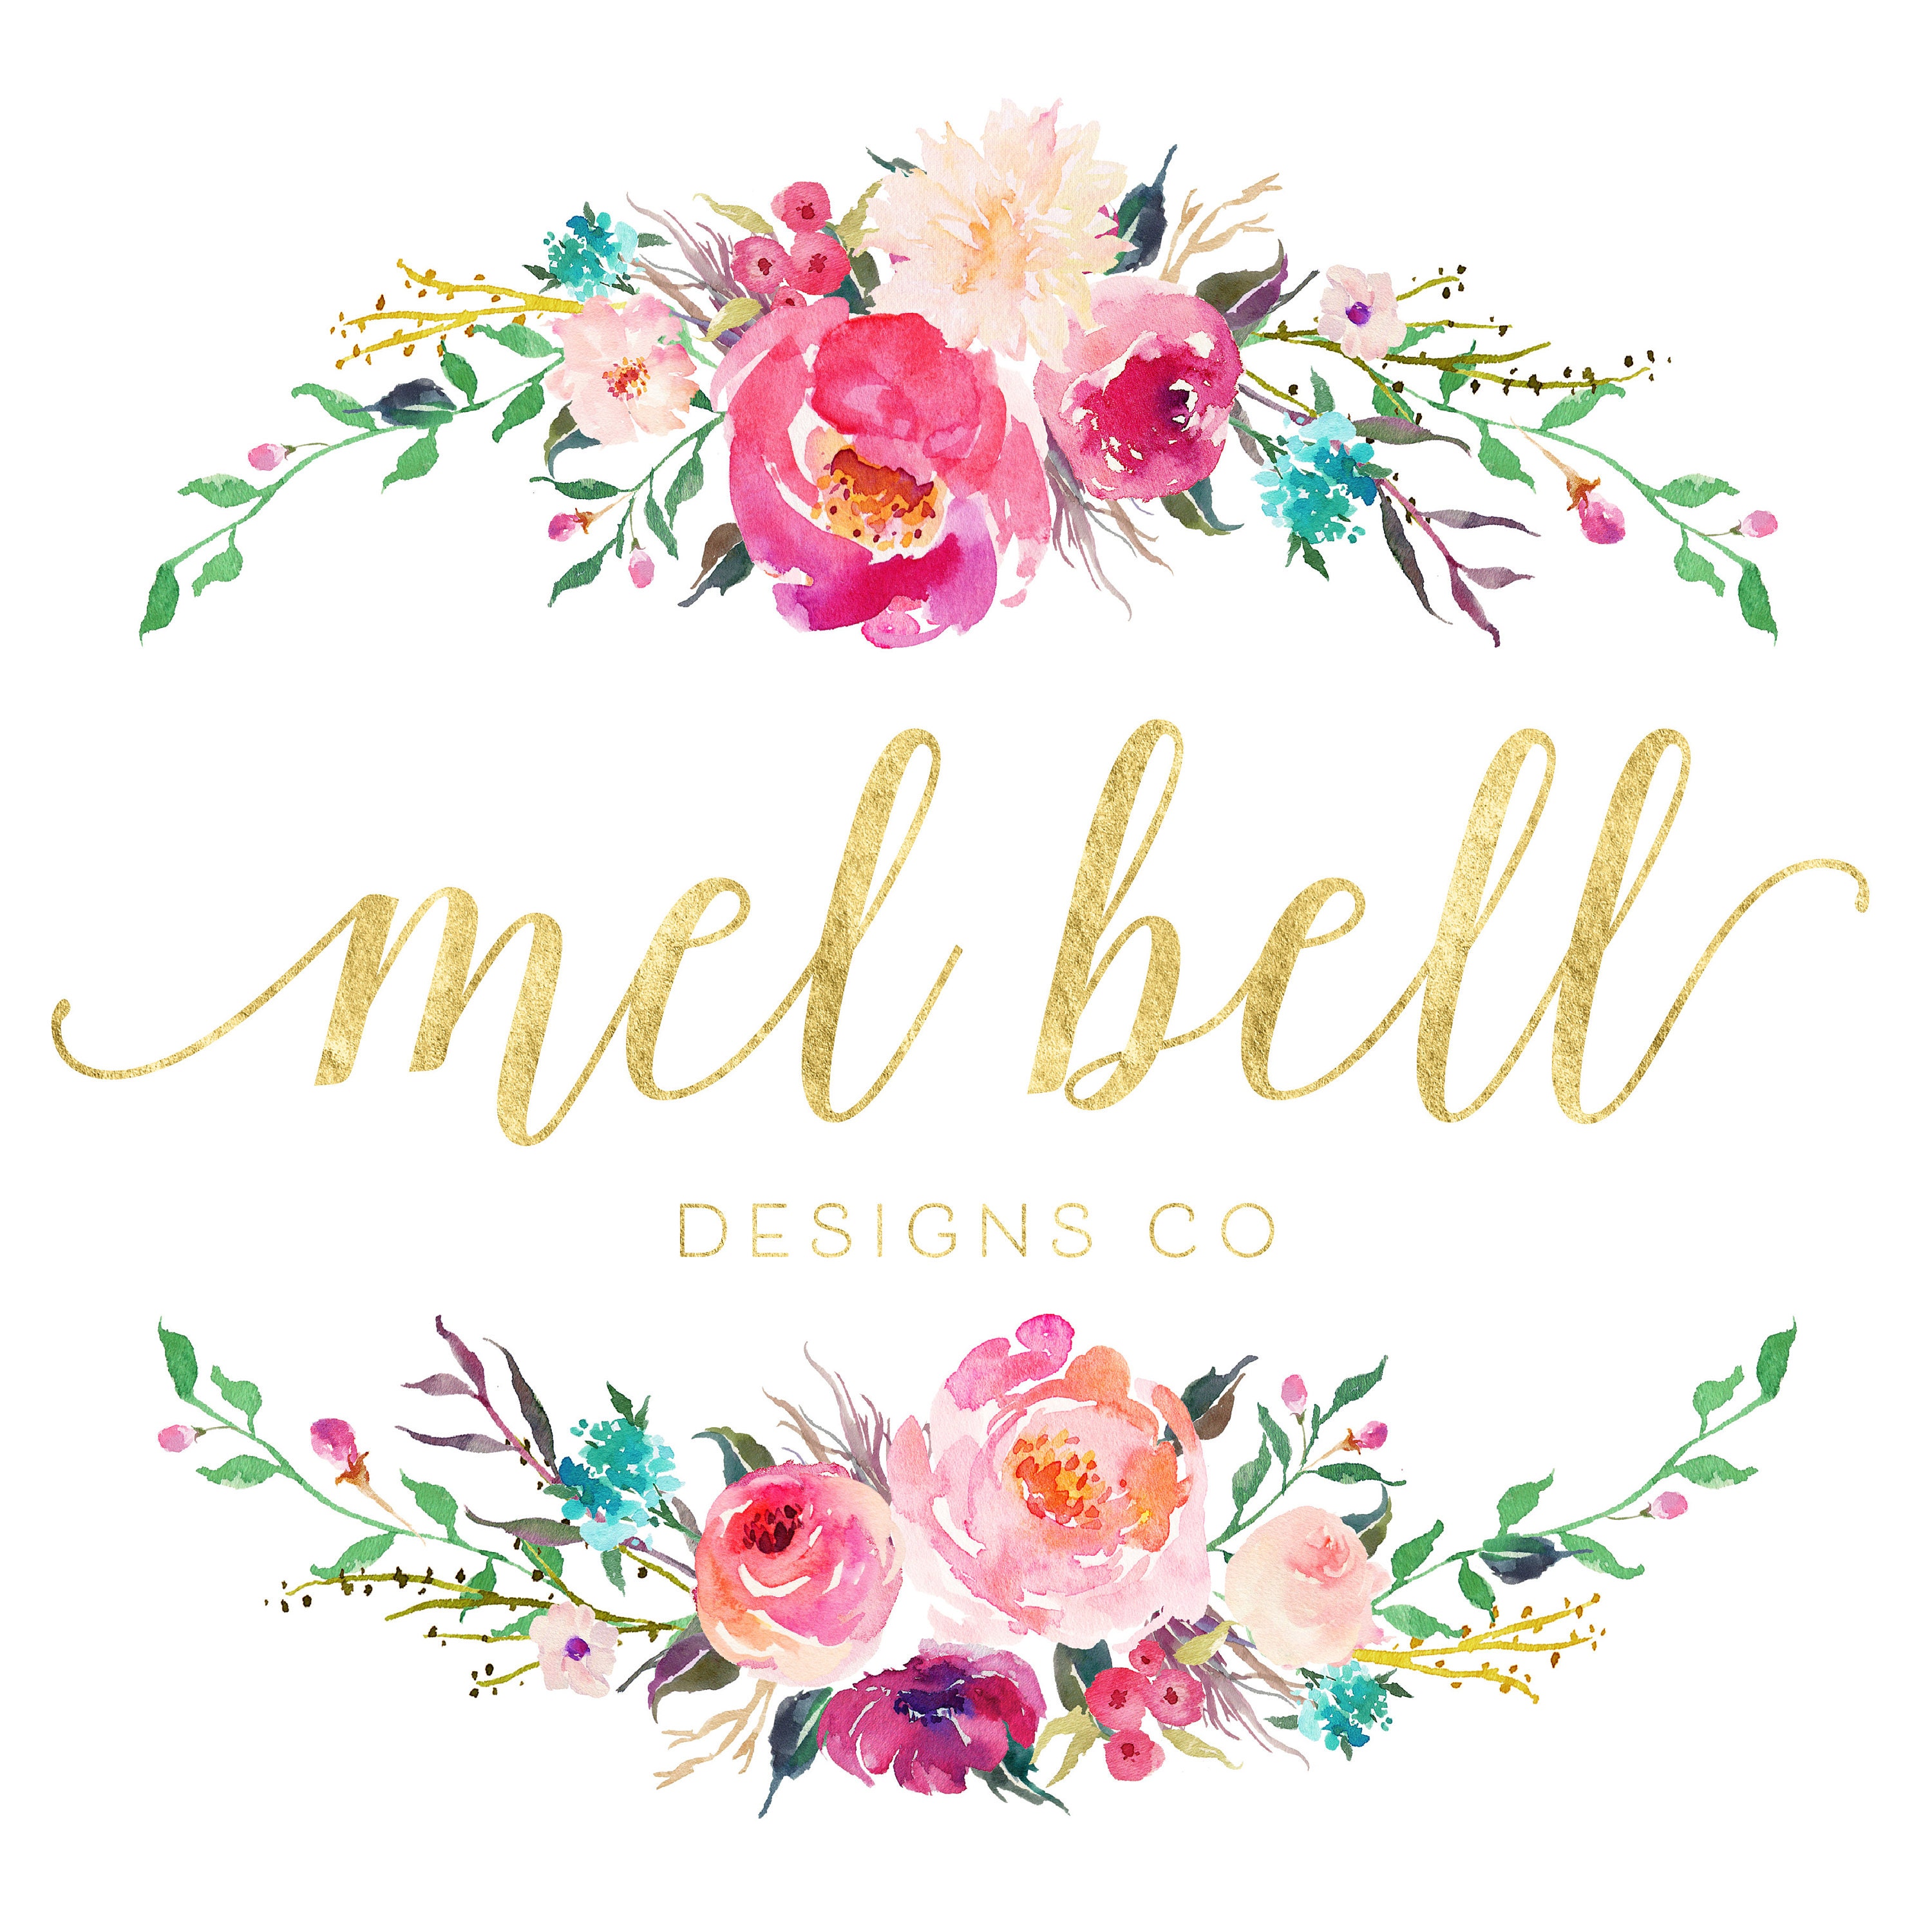 MelBellDesignsCo This link opens in a new tab or window